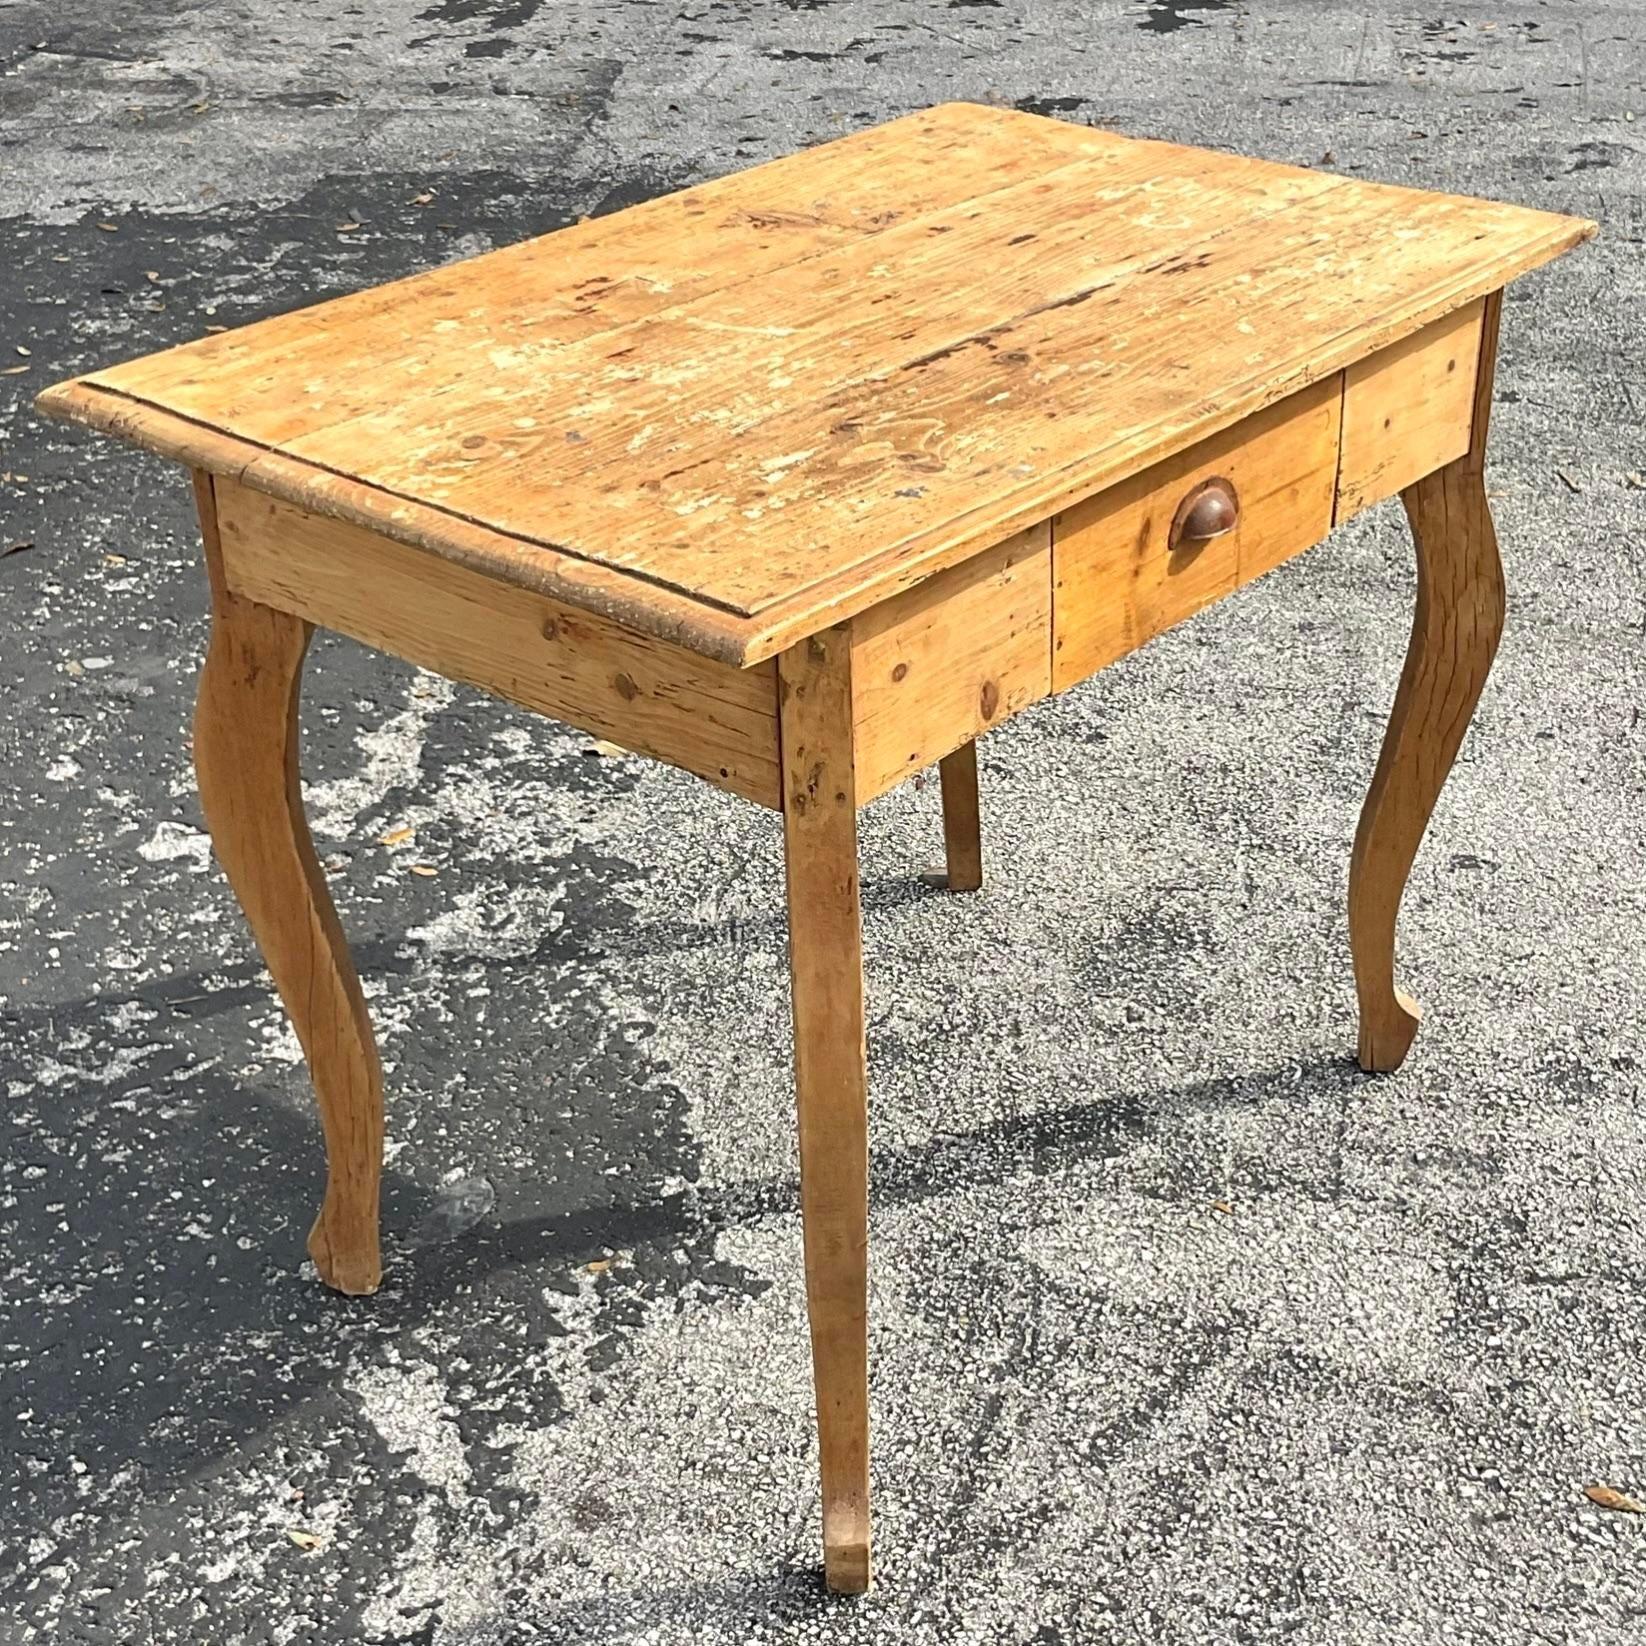 A stunning vintage Boho writing desk. Made in France and the perfect amount of patina from the years of use. Rustic Cabriolet legs and a clean shape. Acquired from a Palm Beach estate. 